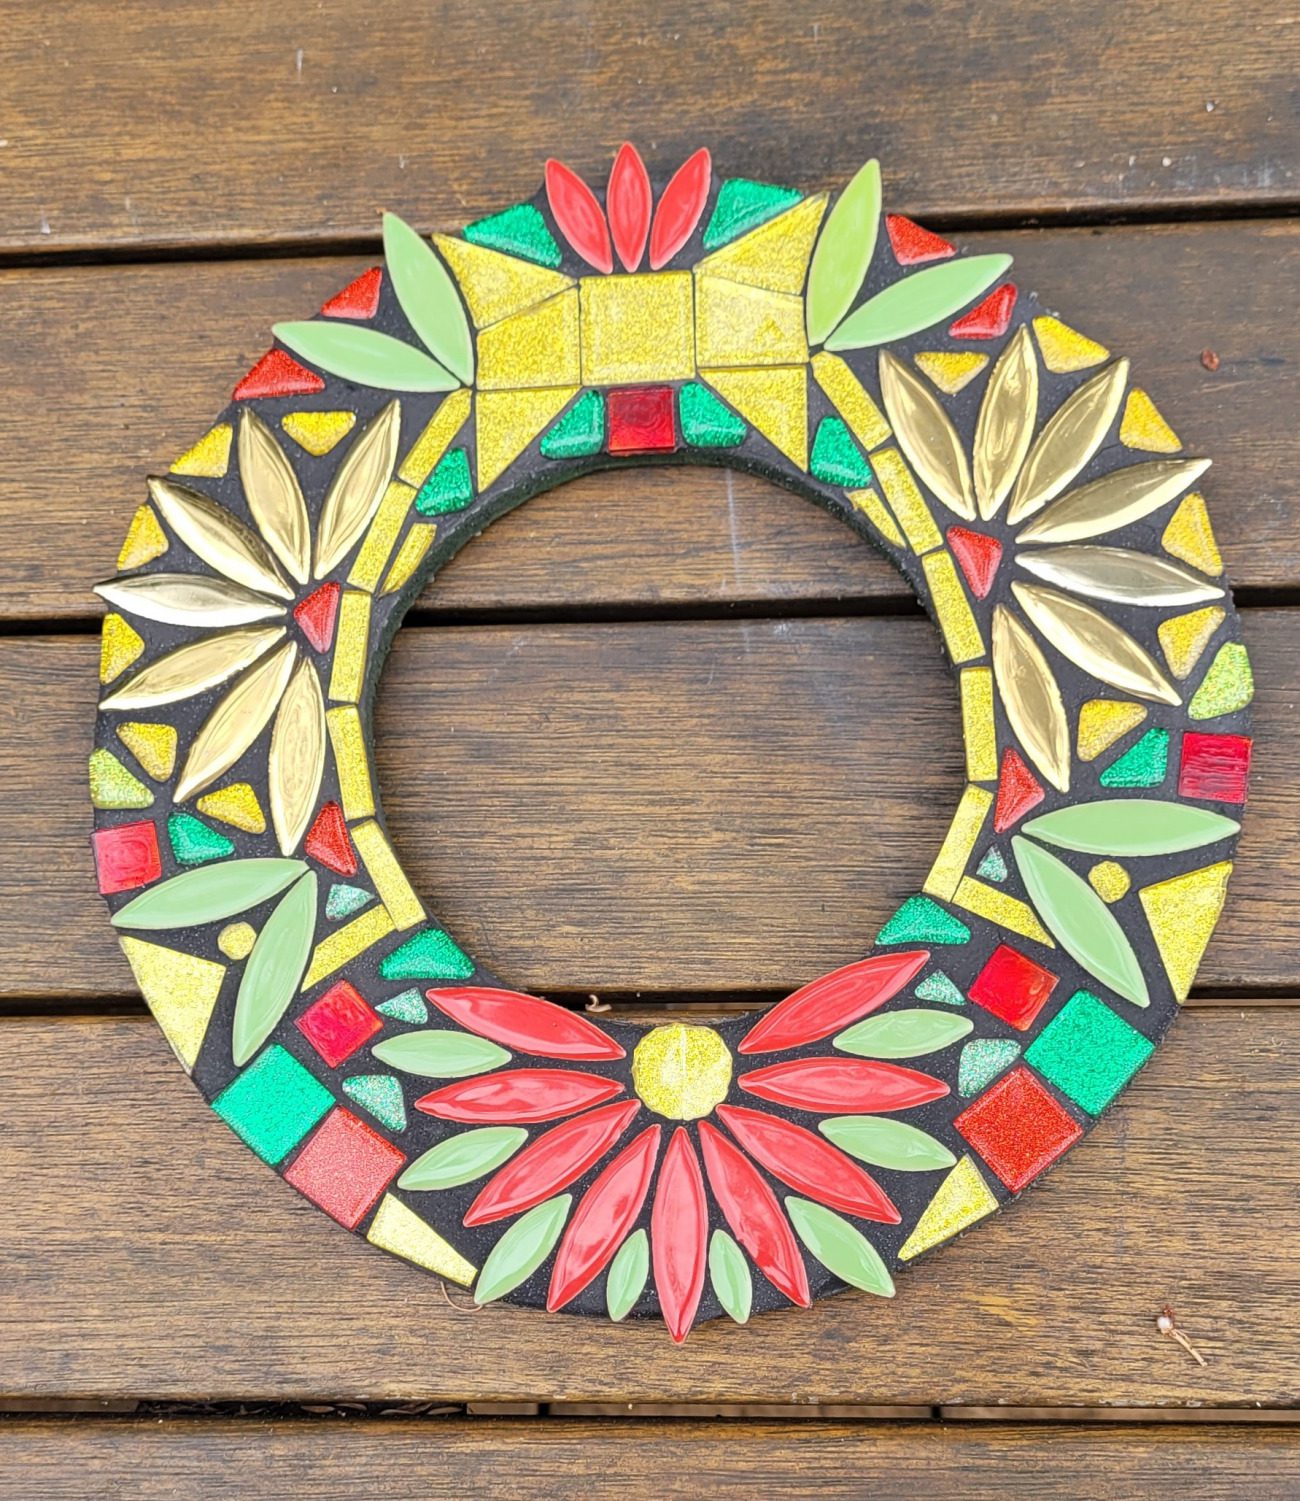 Christmas Wreath Workshop - 26 November 2022 - Fully Booked